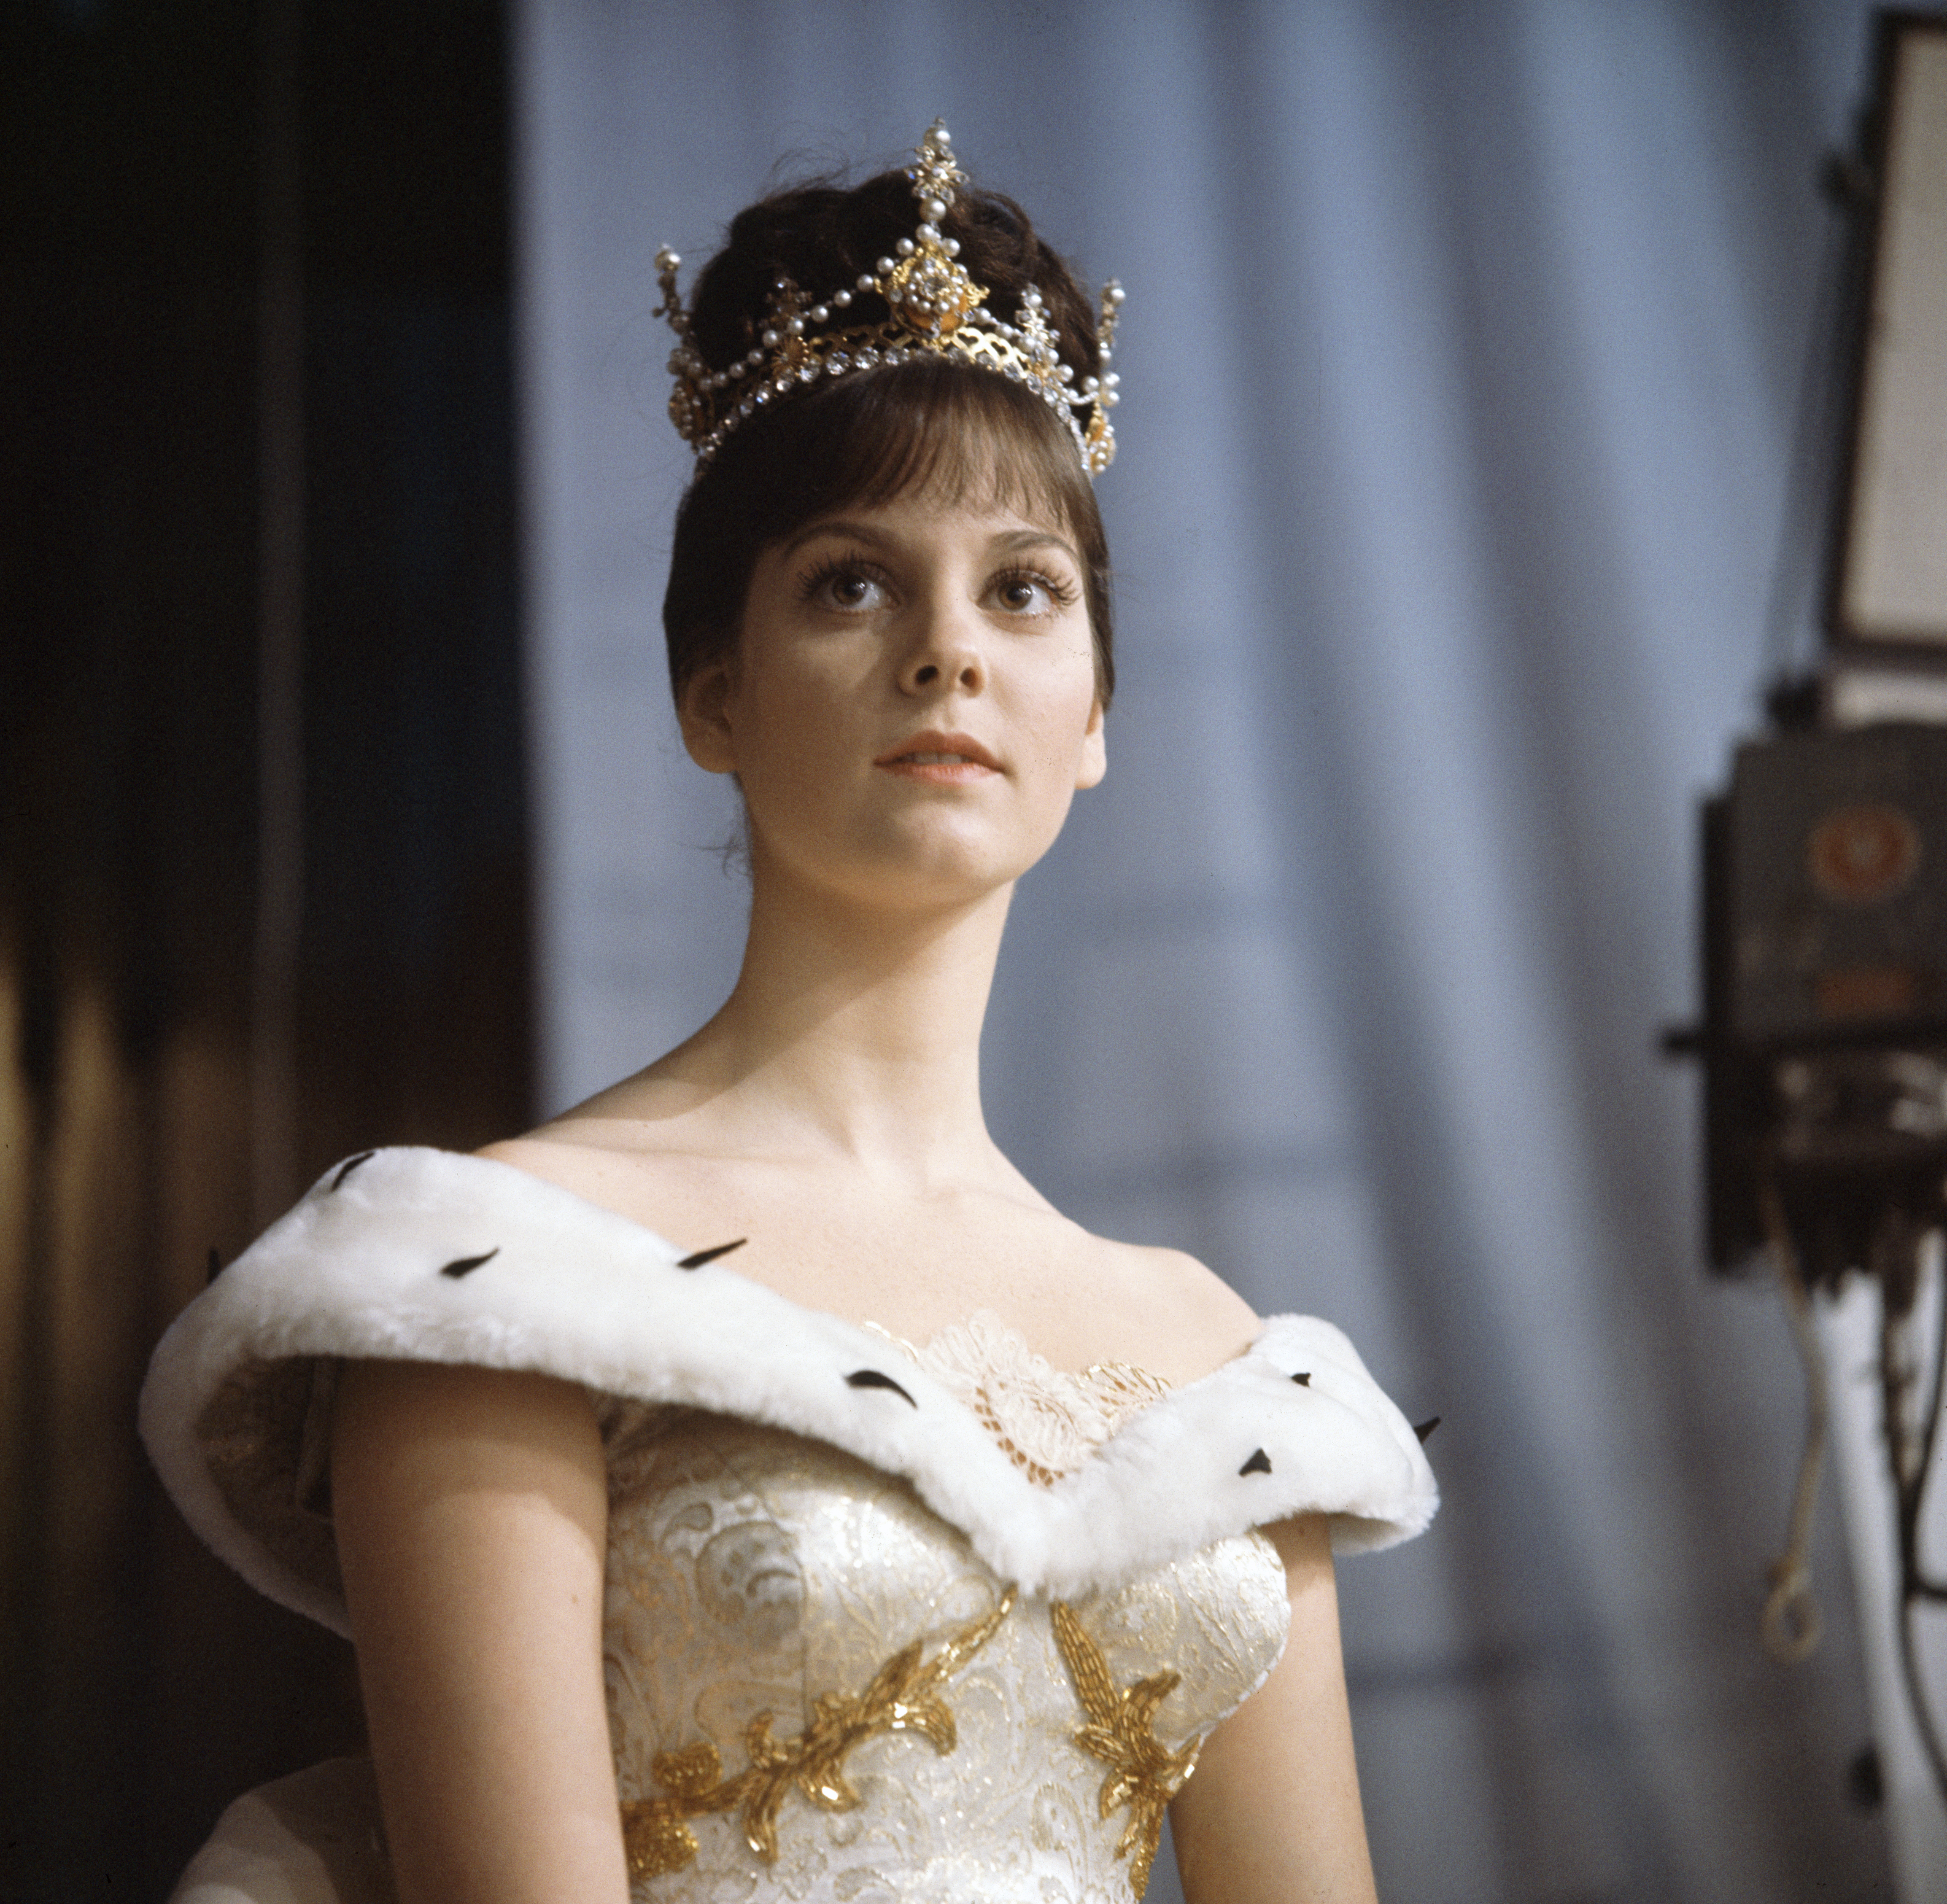 Lesley Ann Warren as Cinderella in the movie made for TV "Cinderella", 1965 | Source: Getty Images